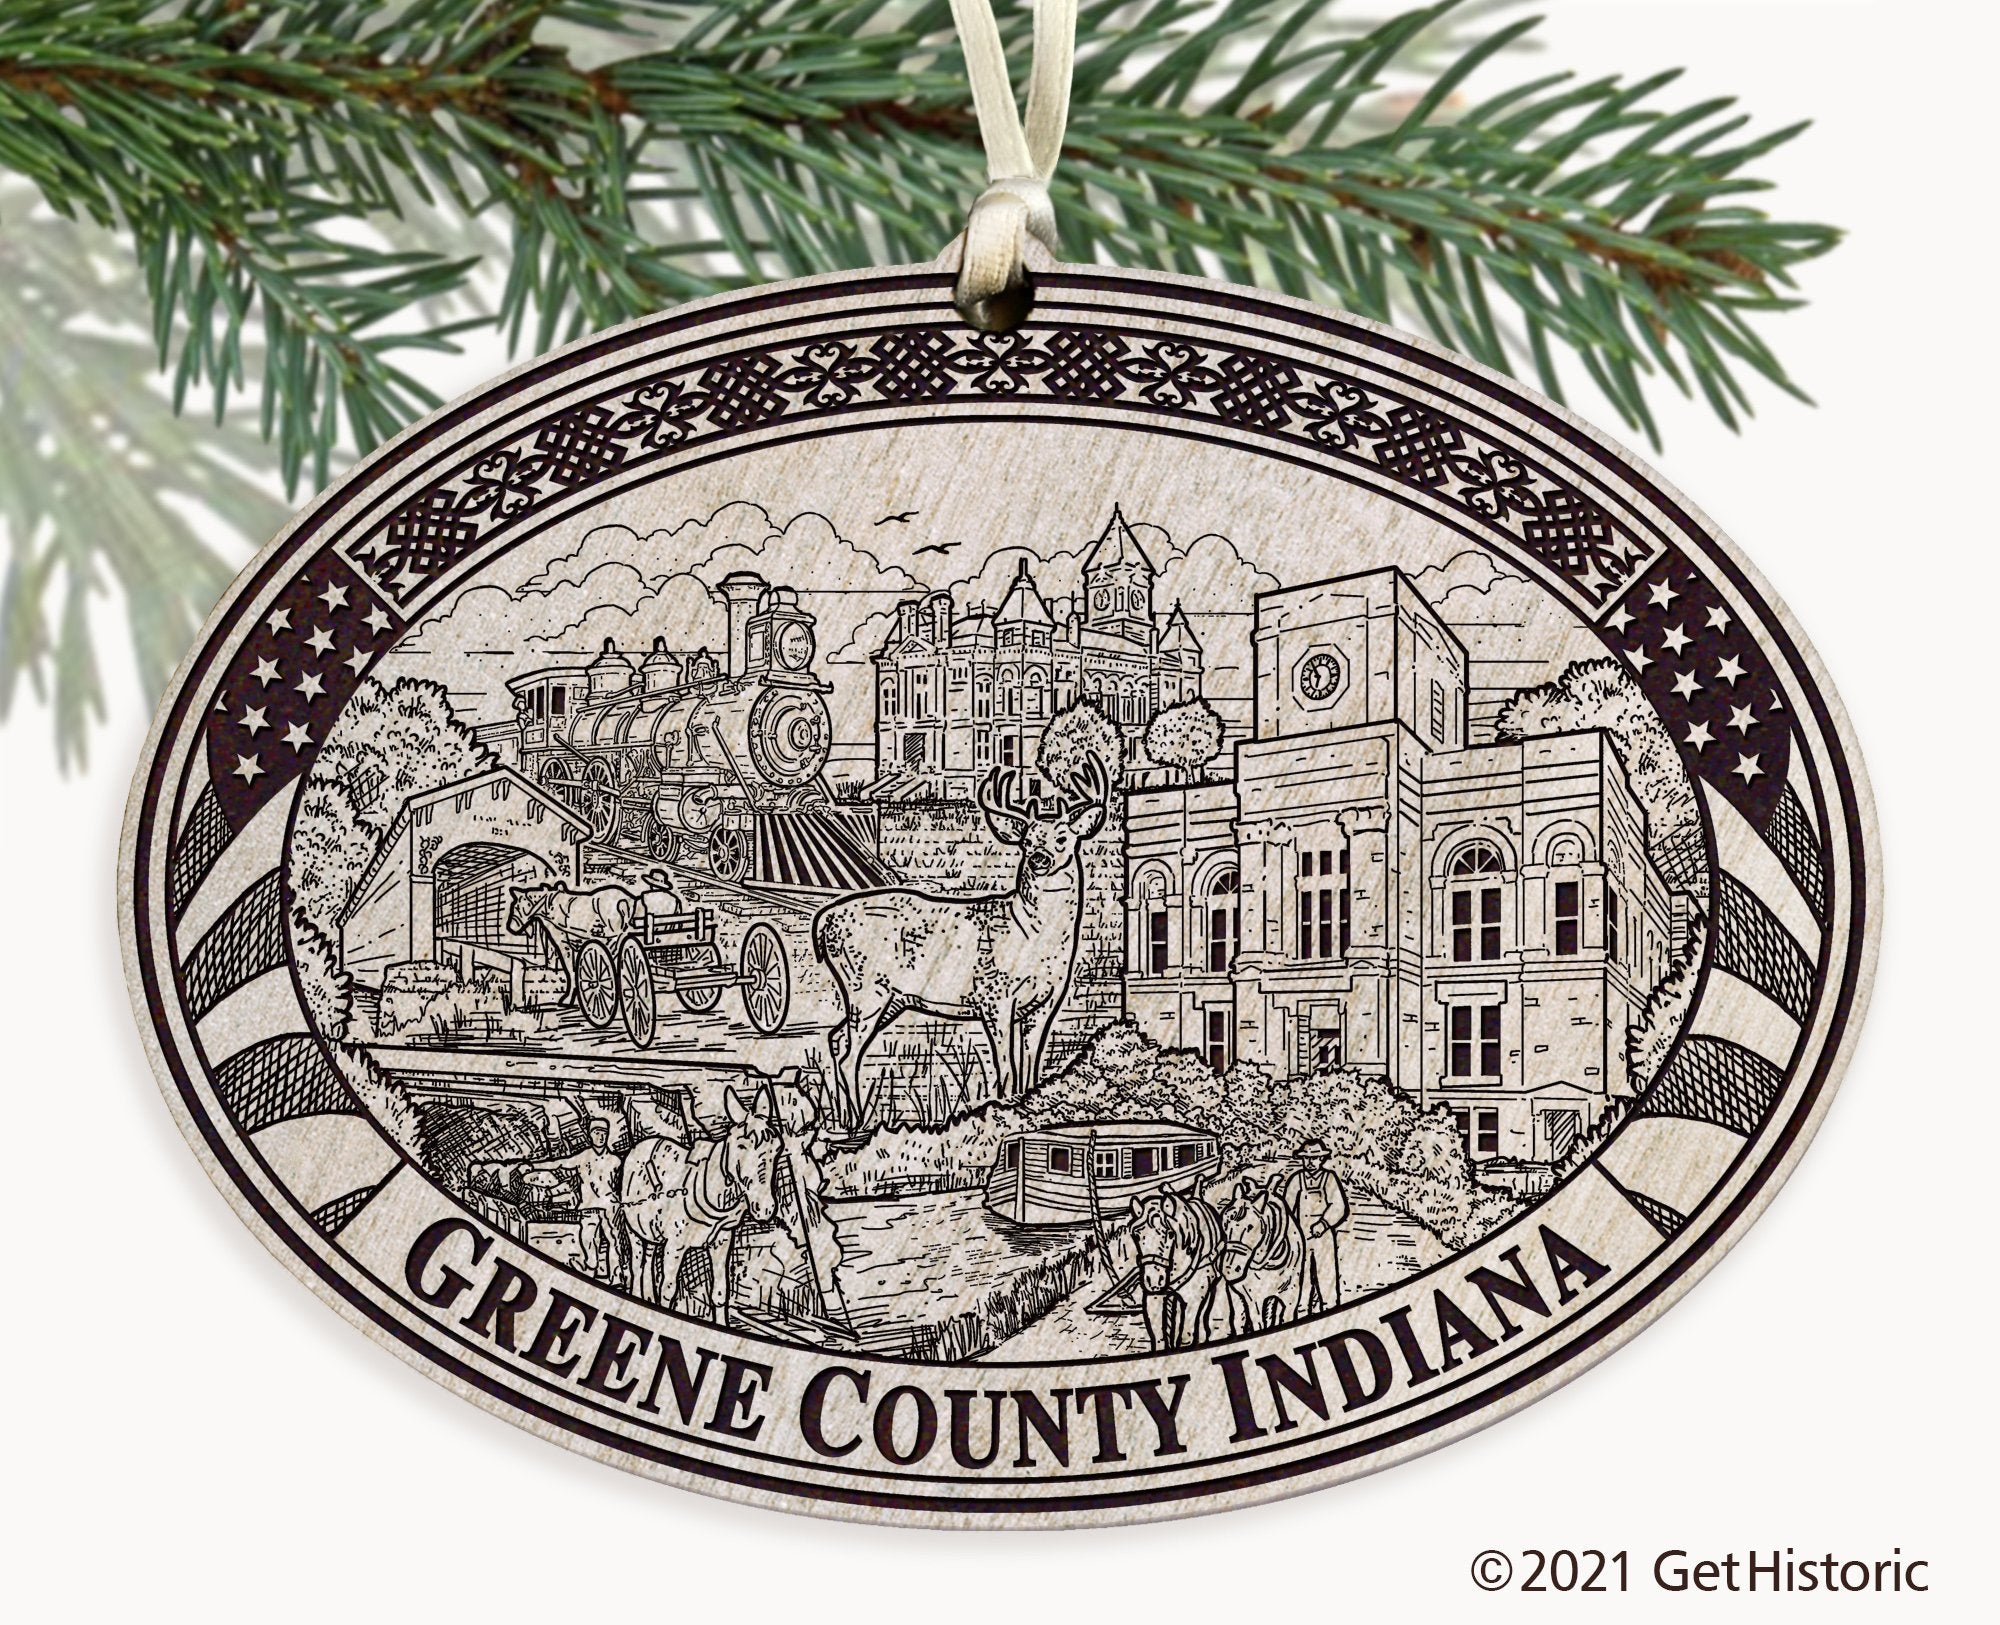 Greene County Indiana Engraved Ornament